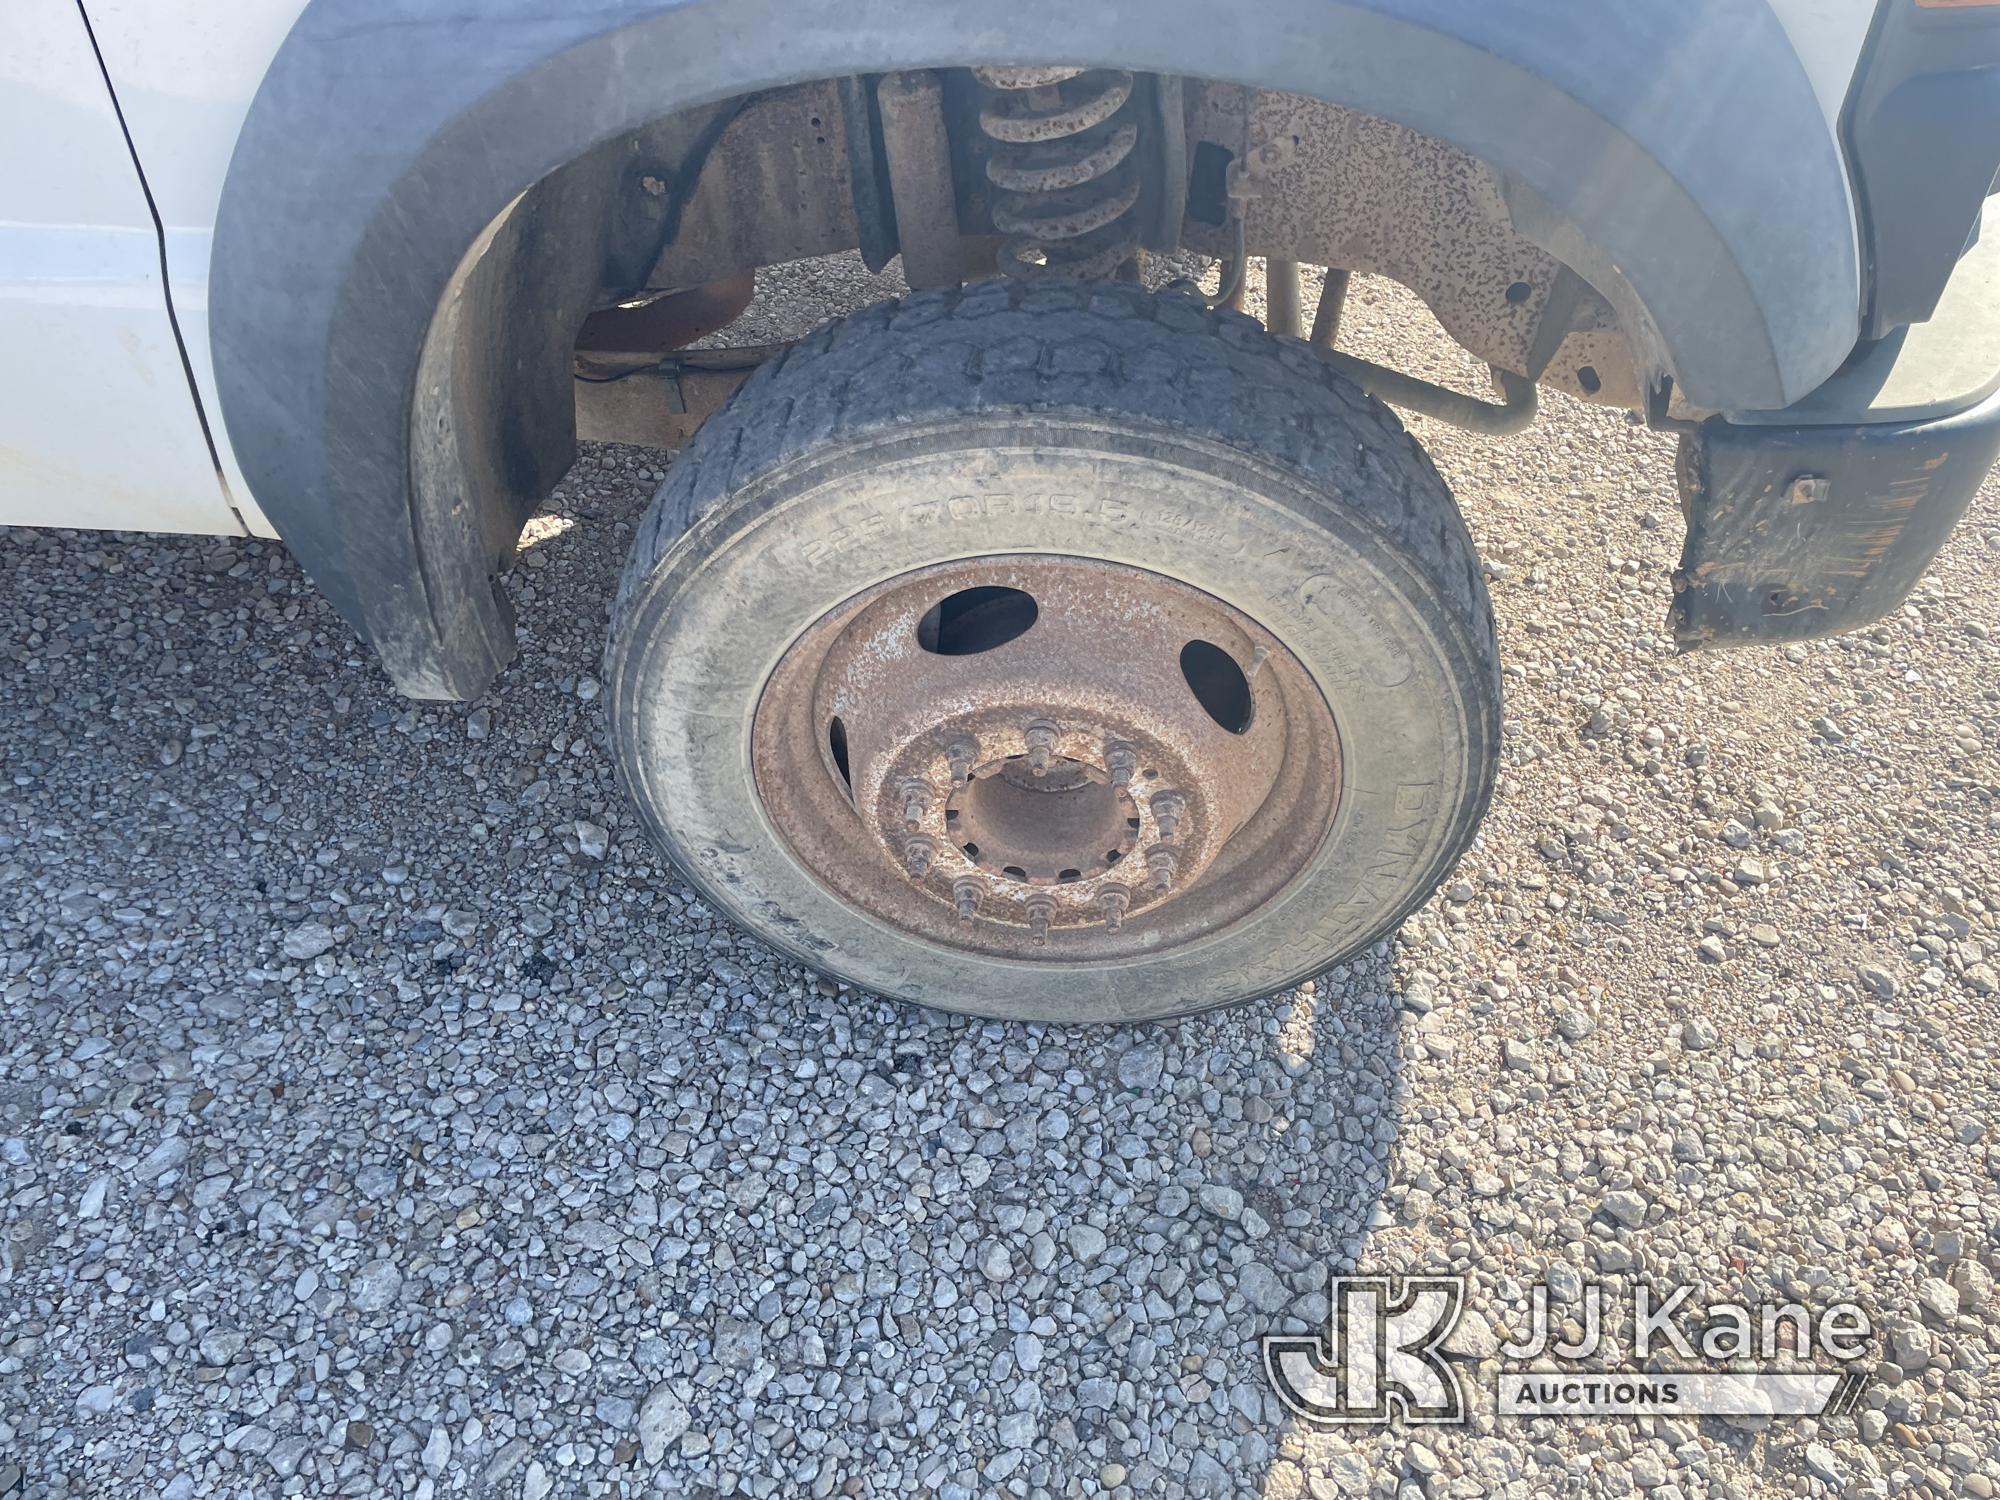 (Waxahachie, TX) 2008 Ford F550 Flatbed Truck Barely Runs & Moves, Crane Condition Unknown, Jump To